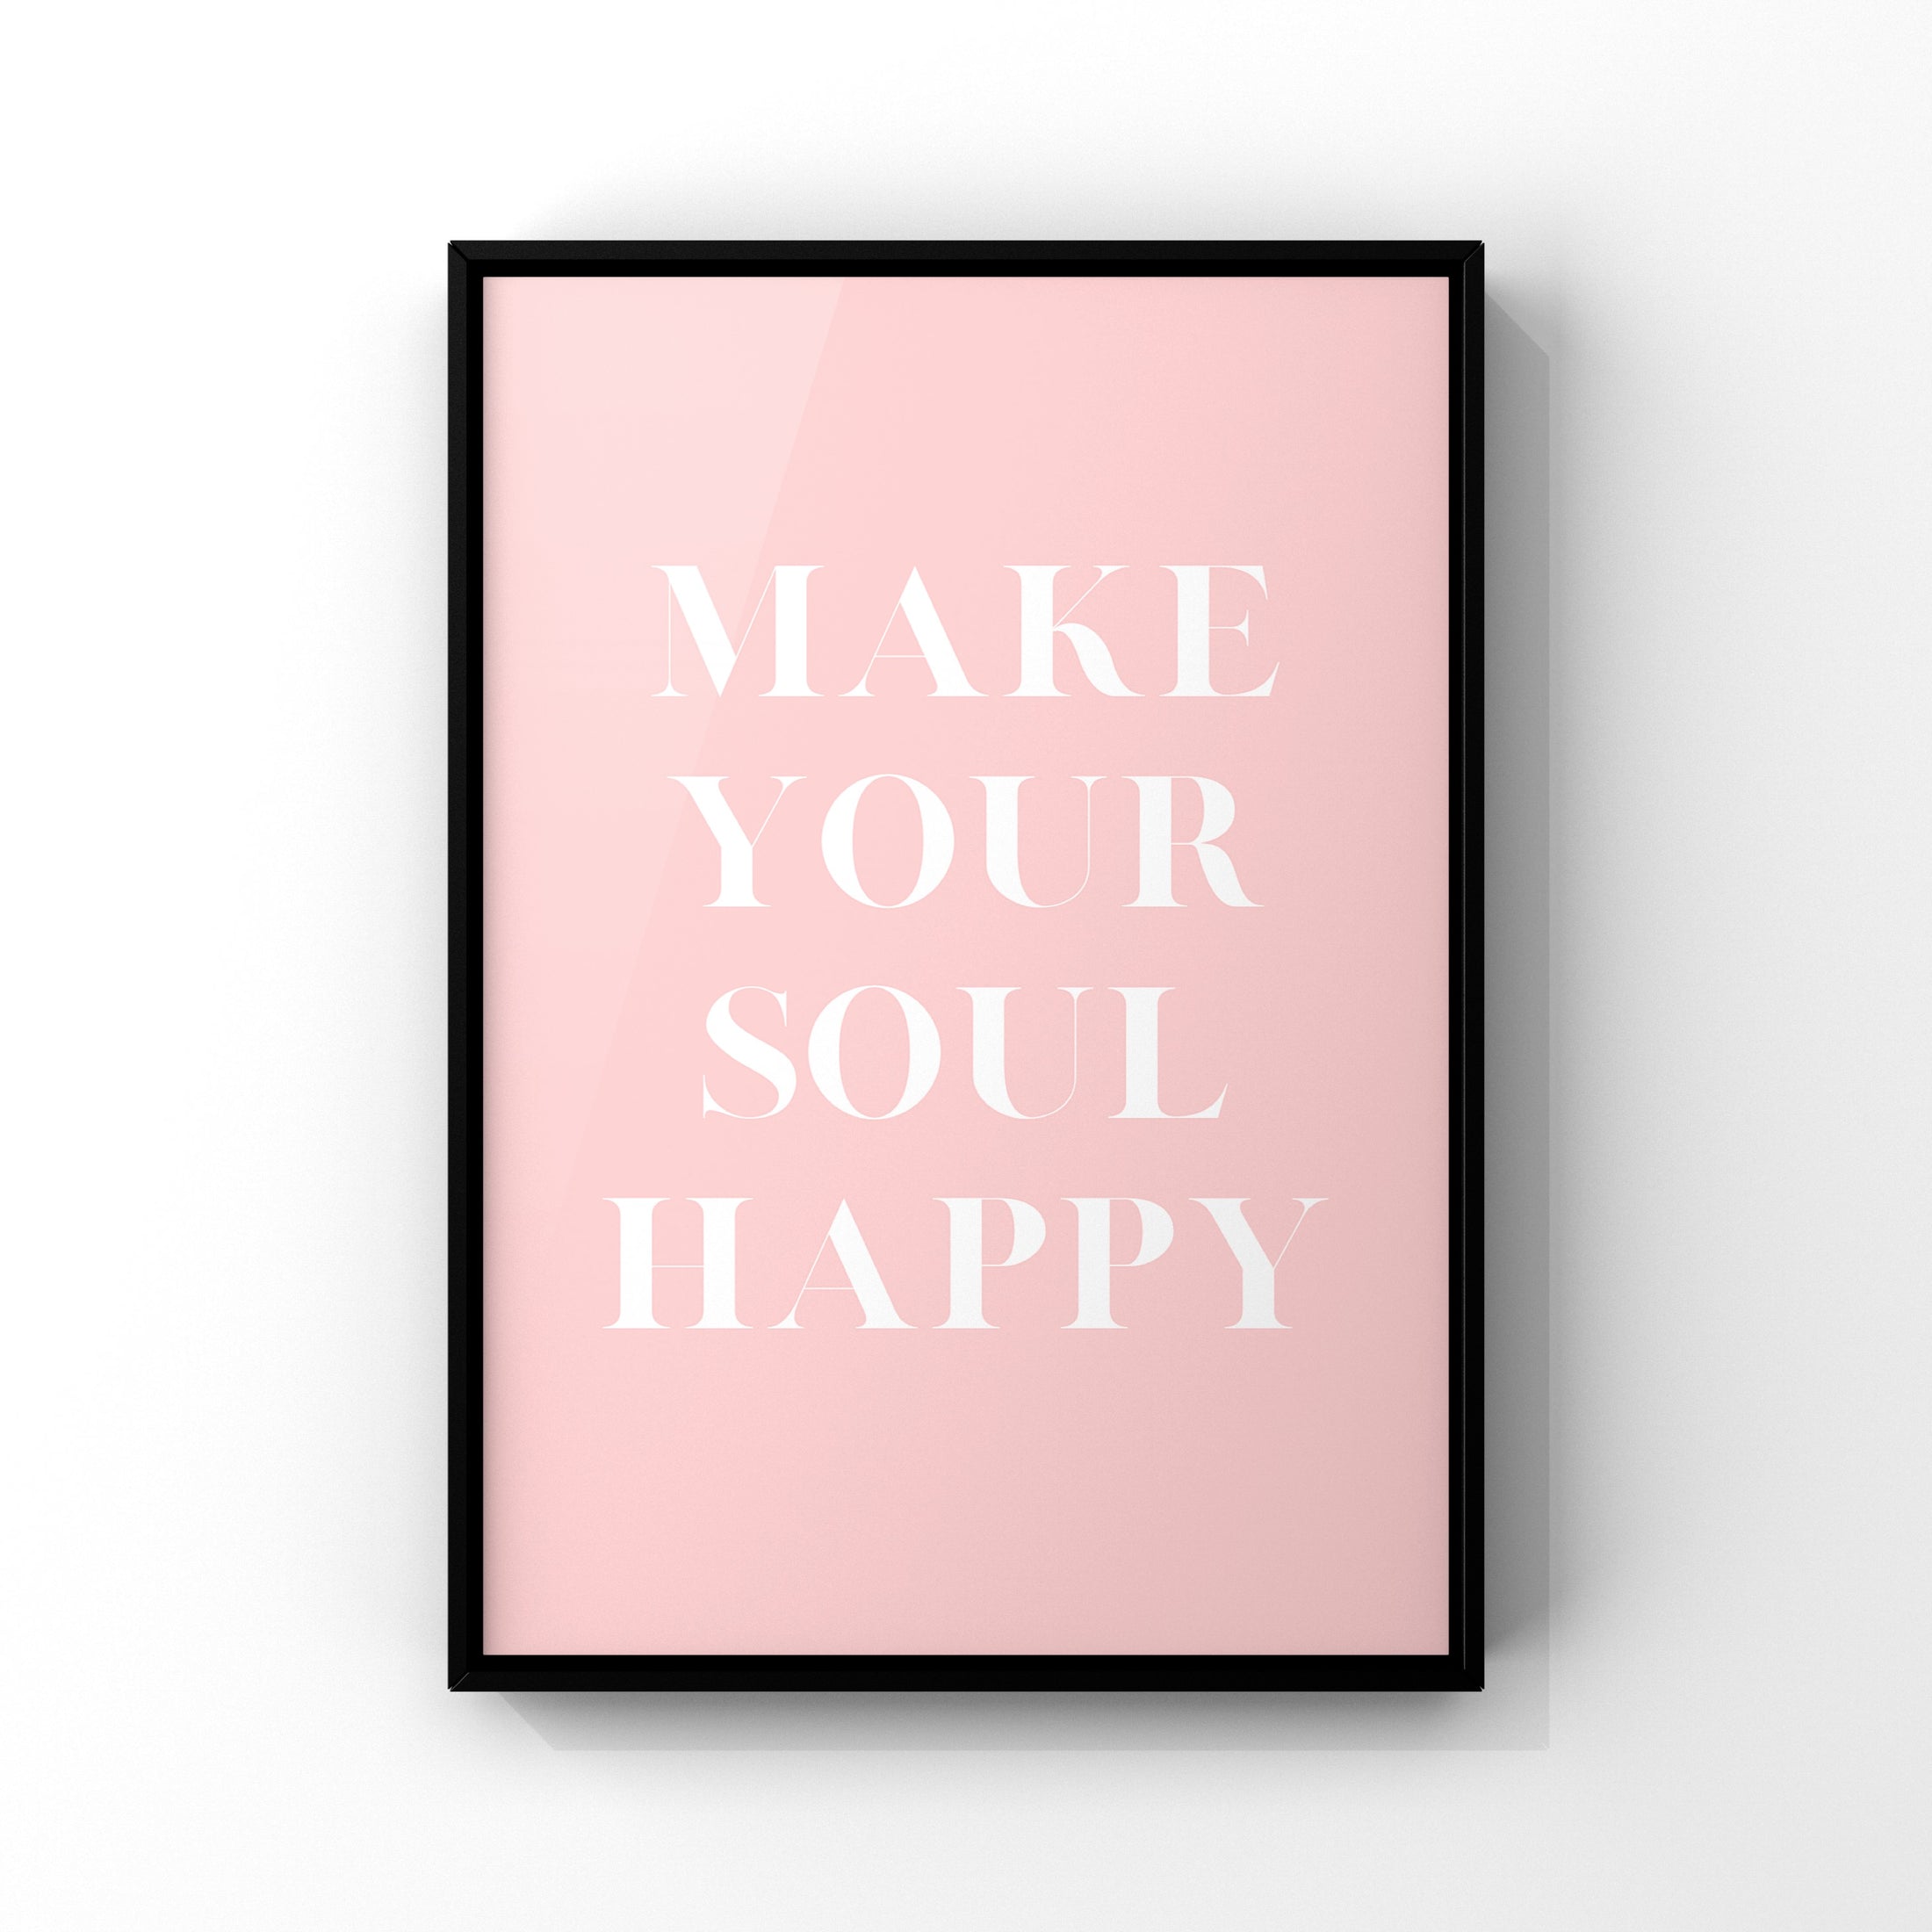 Make your soul happy